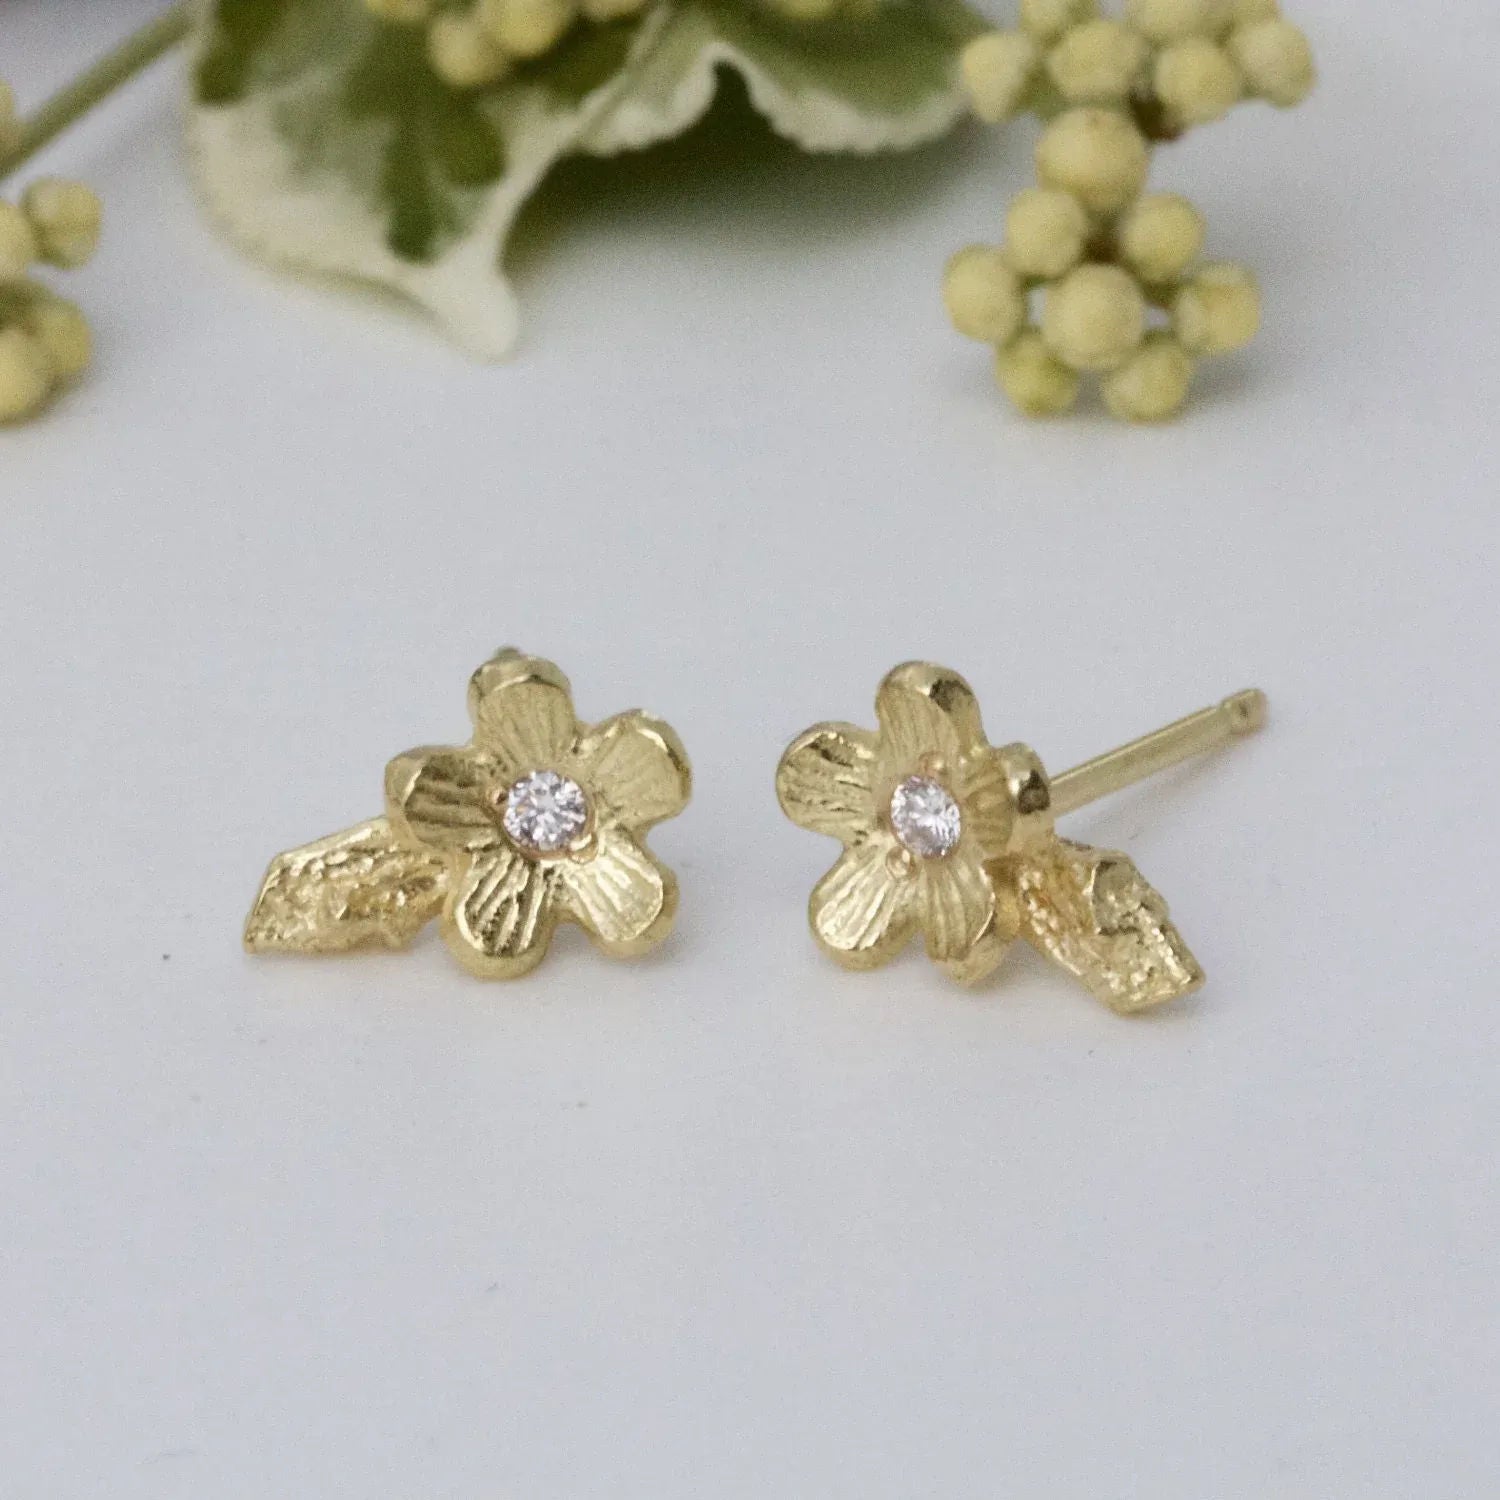 Solid Gold and Diamond Cherry Blossom Earrings, 18ct Gold Flower Stud Earrings - Boutee